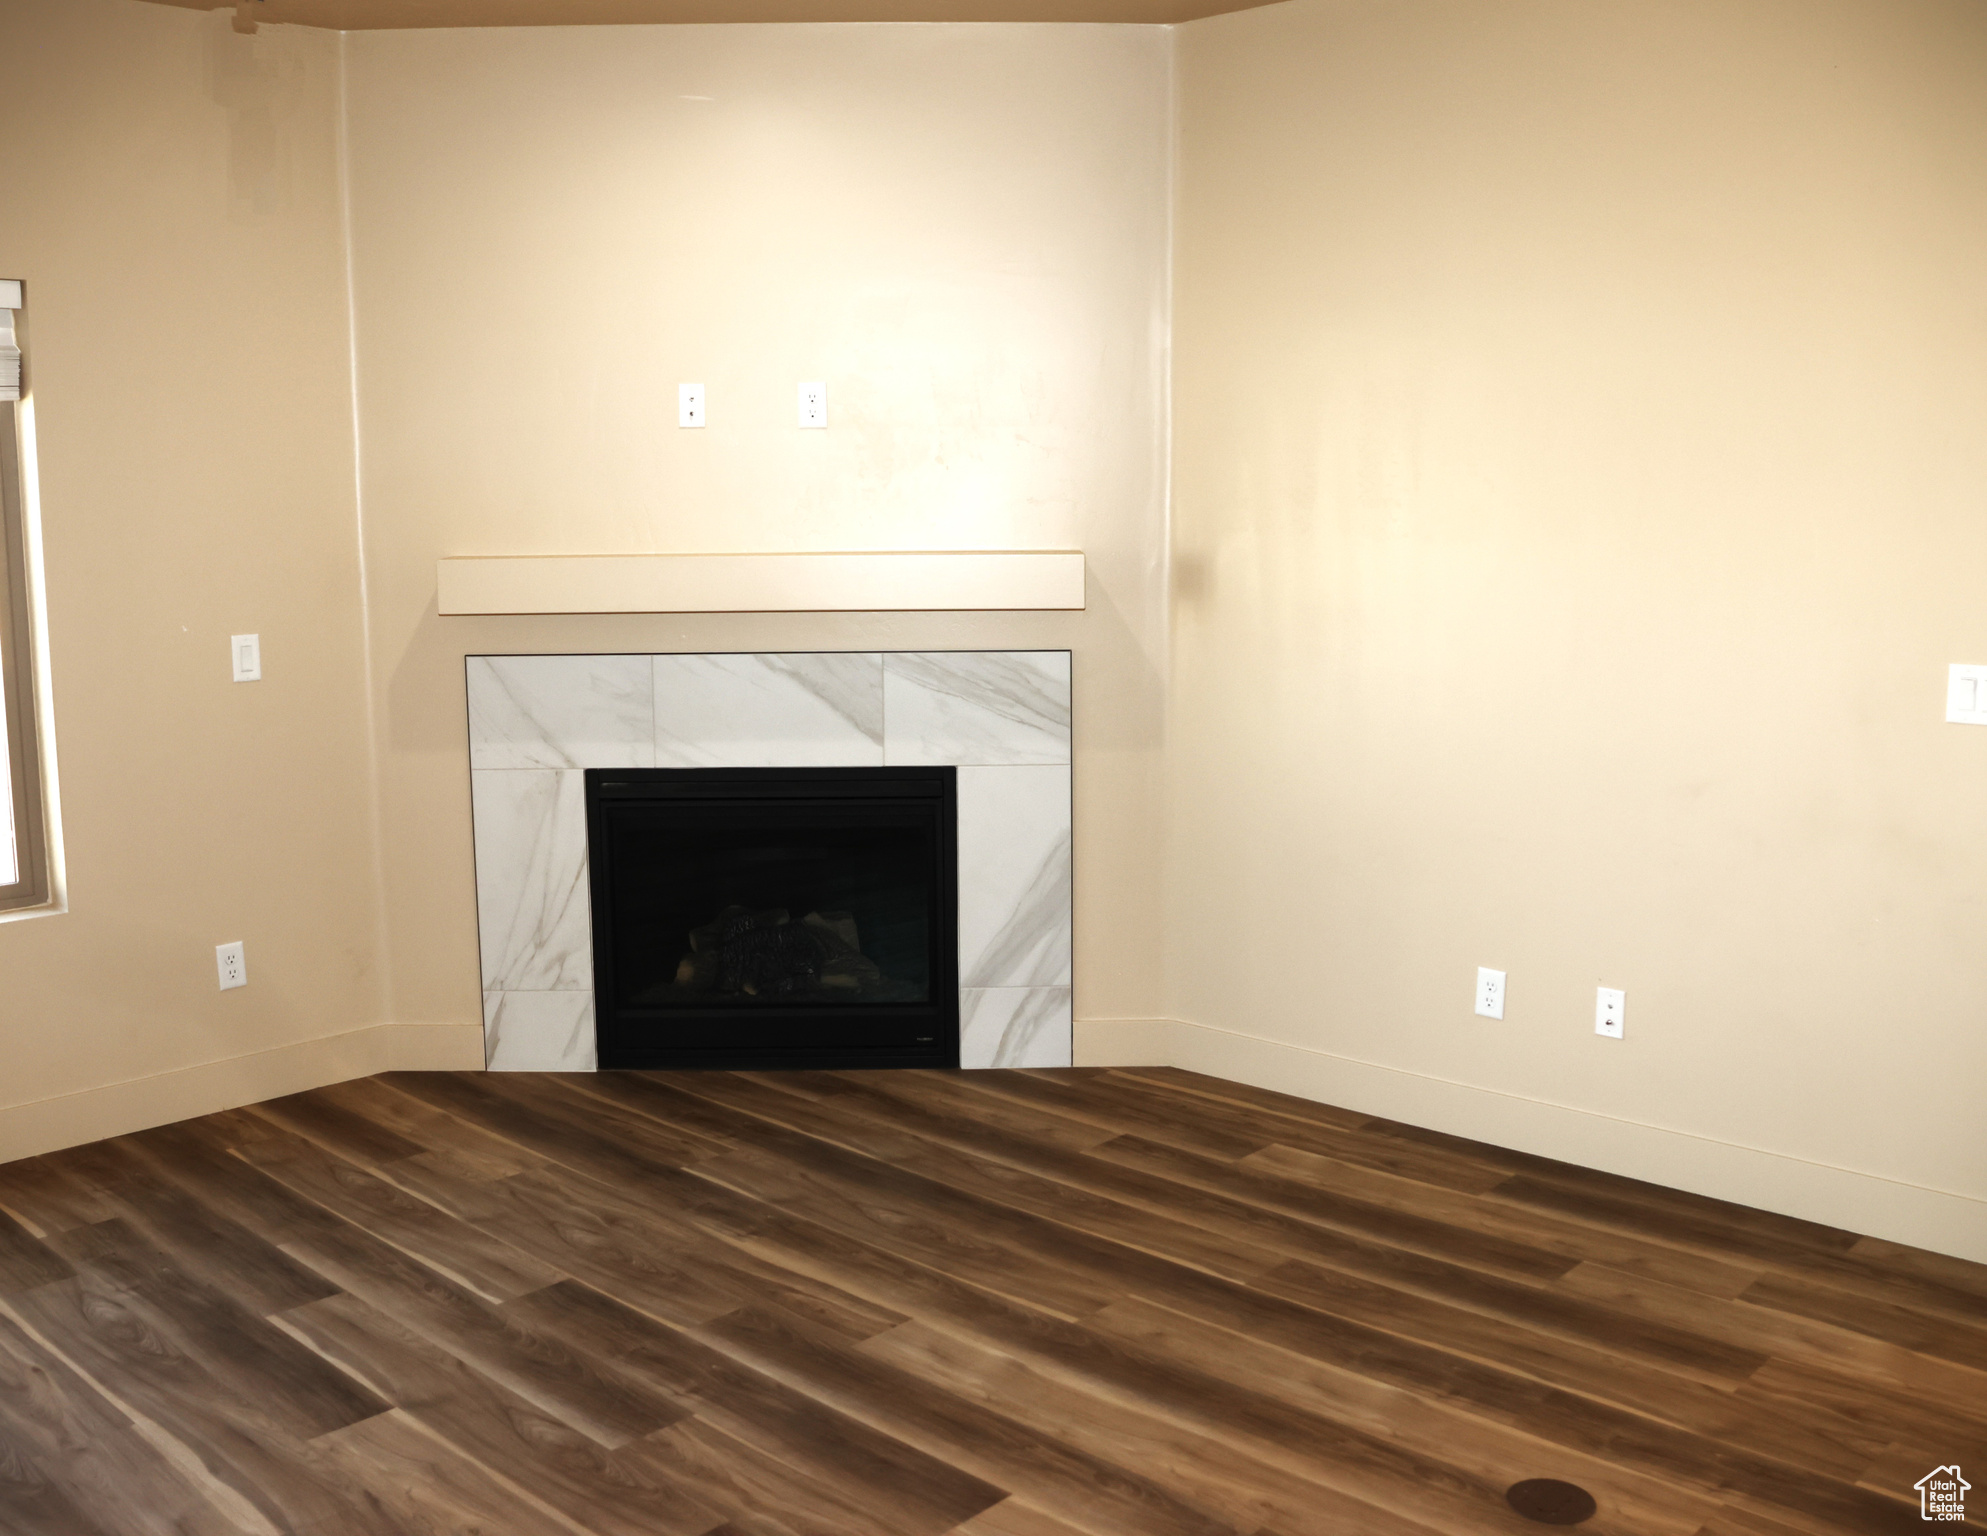 Unfurnished living room with dark wood-type flooring and a tiled fireplace